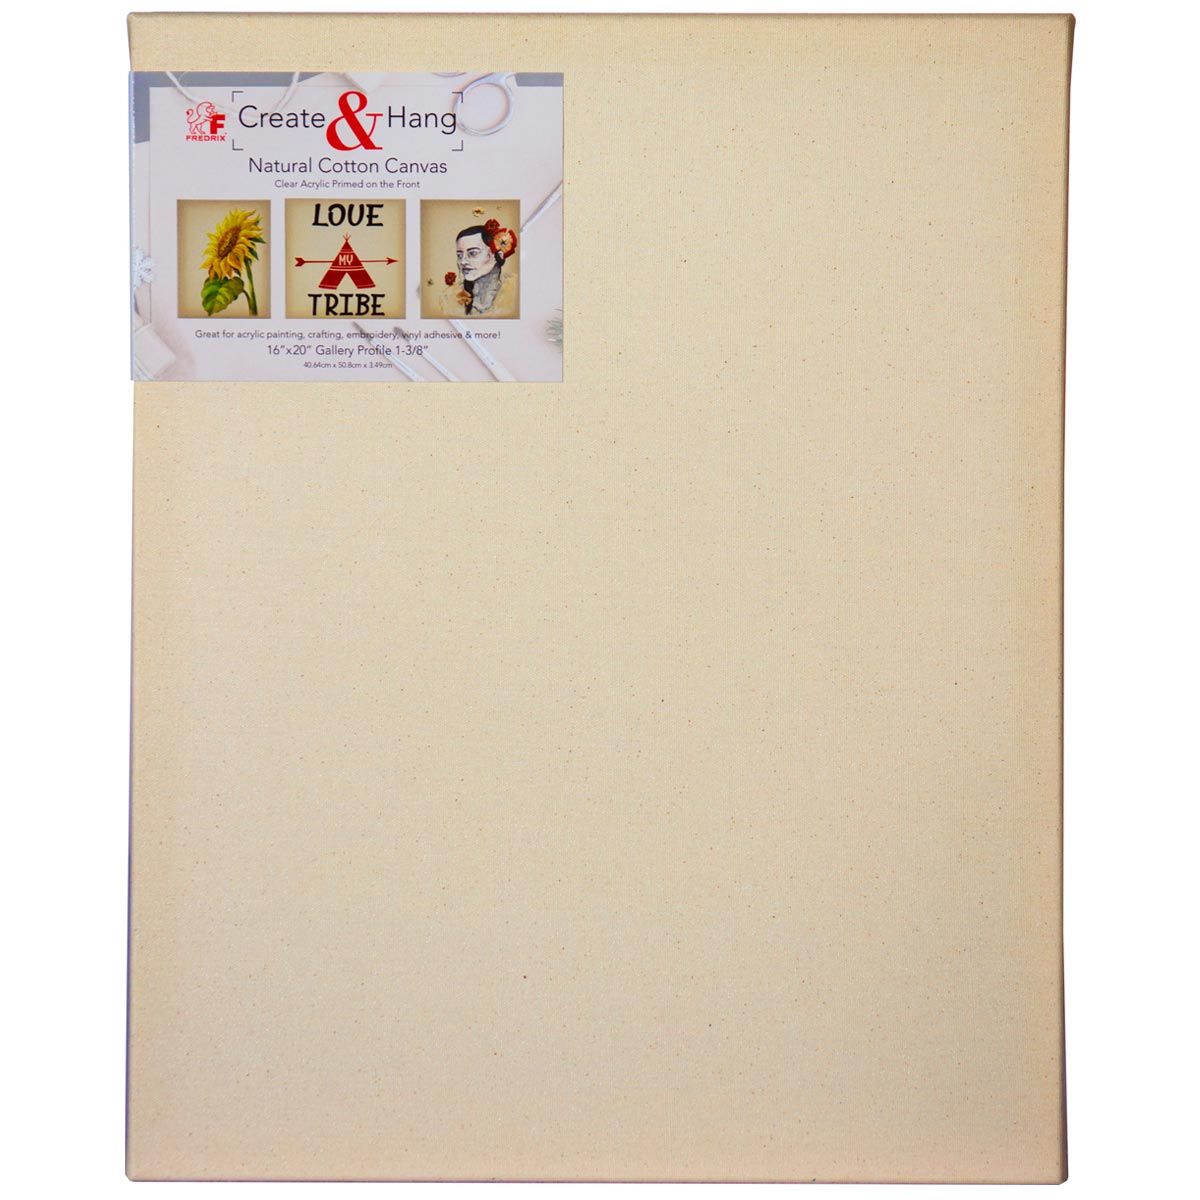 Create & Hang Natural Cotton Canvas 8oz Primed 16 x 20 inches